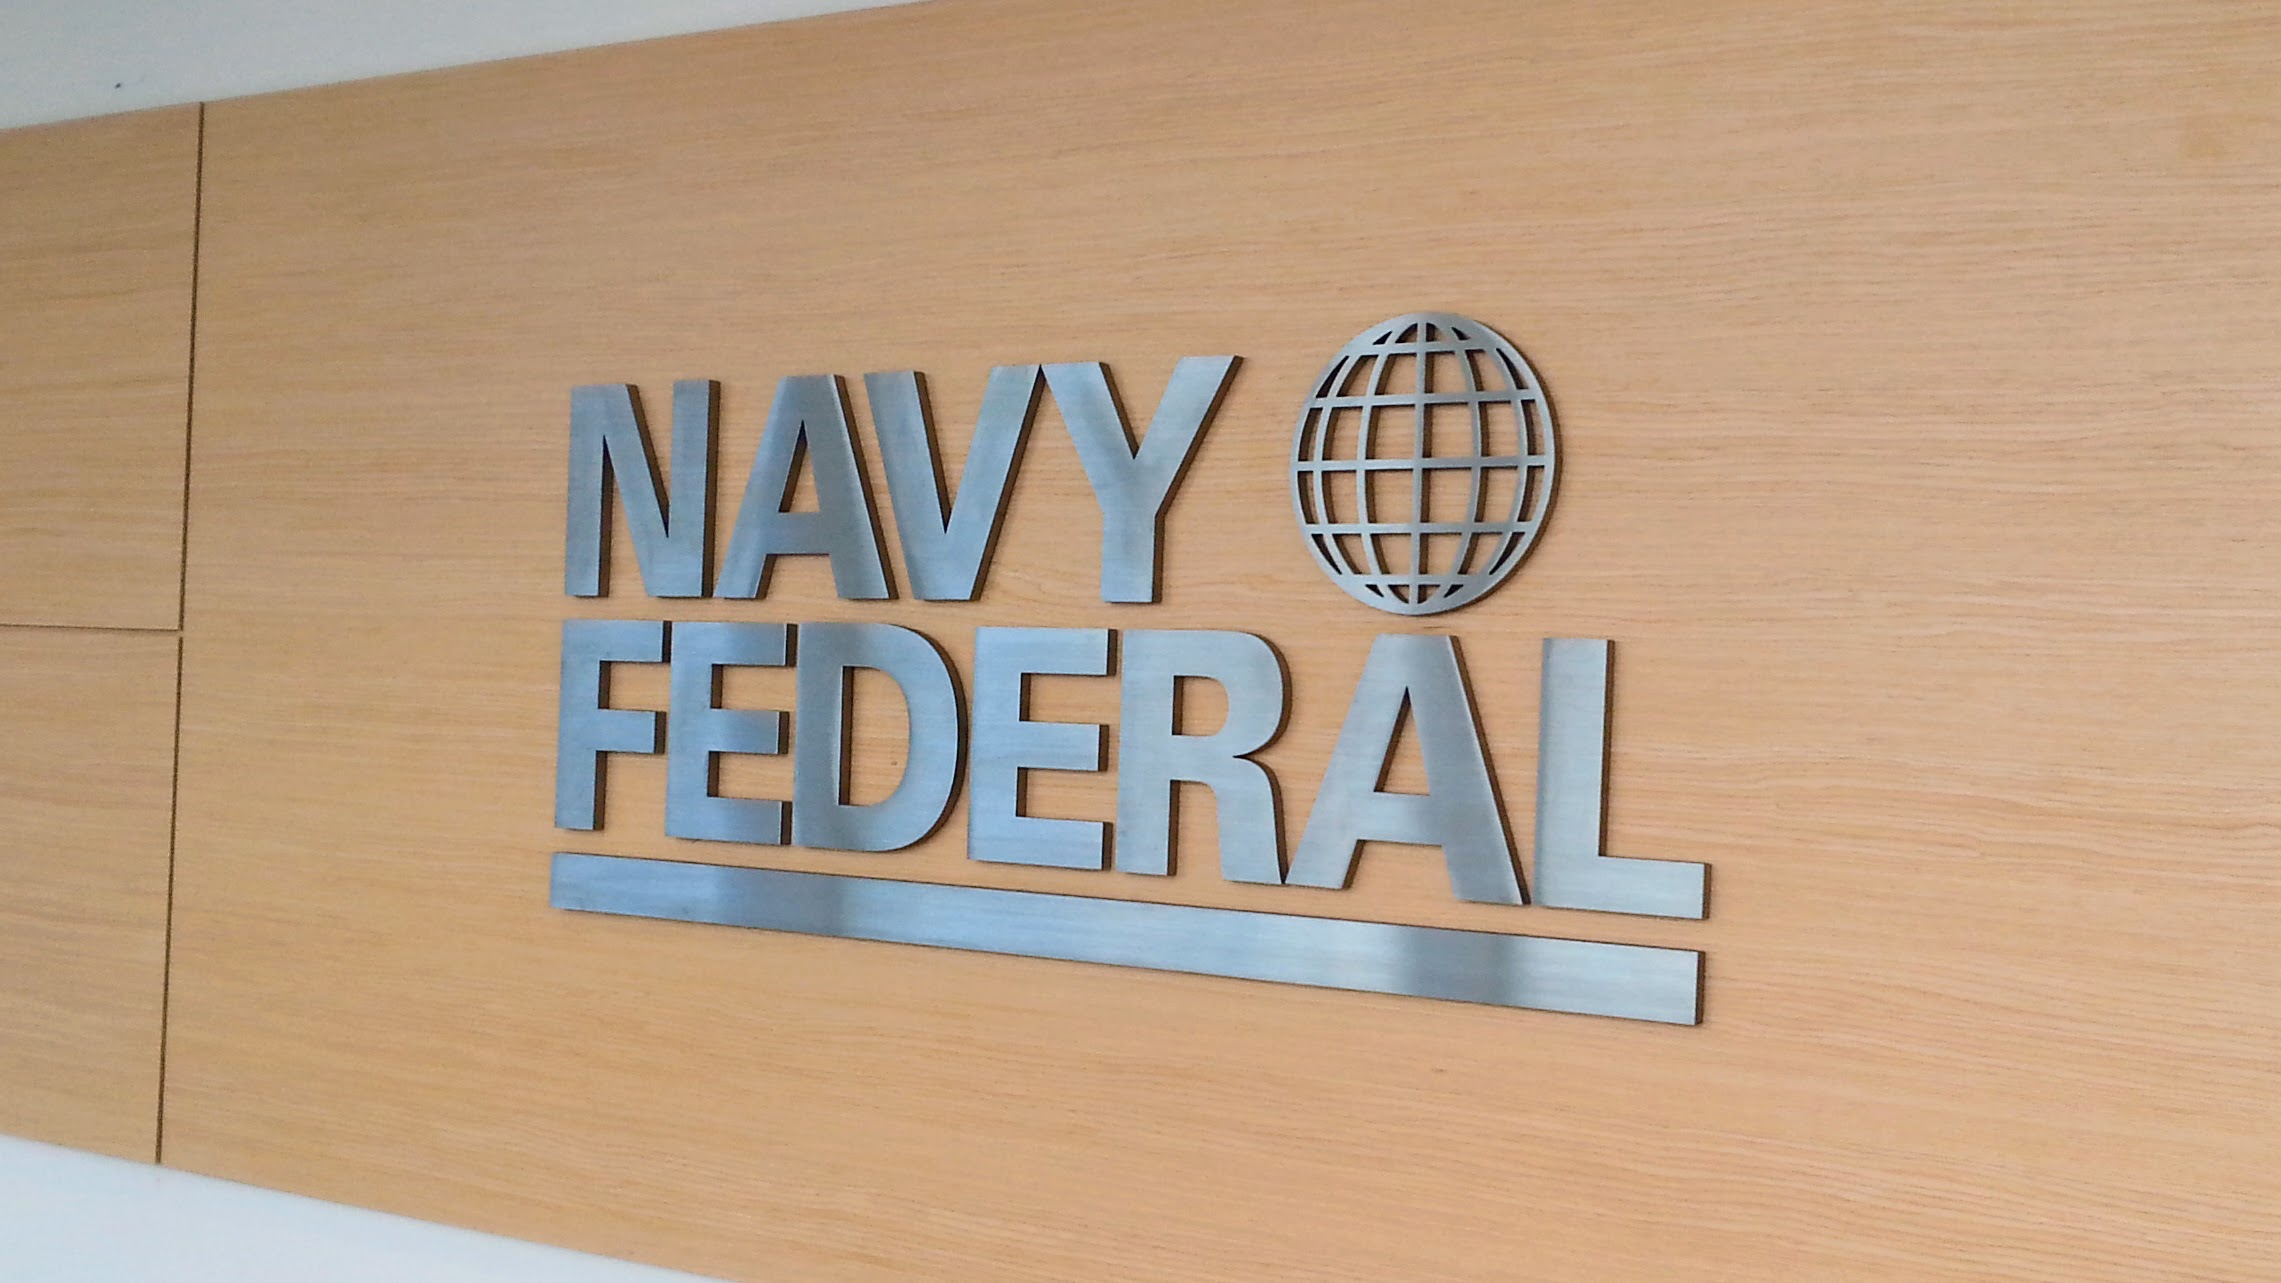 Architectural signage for Navy Federal by Pensacola Sign